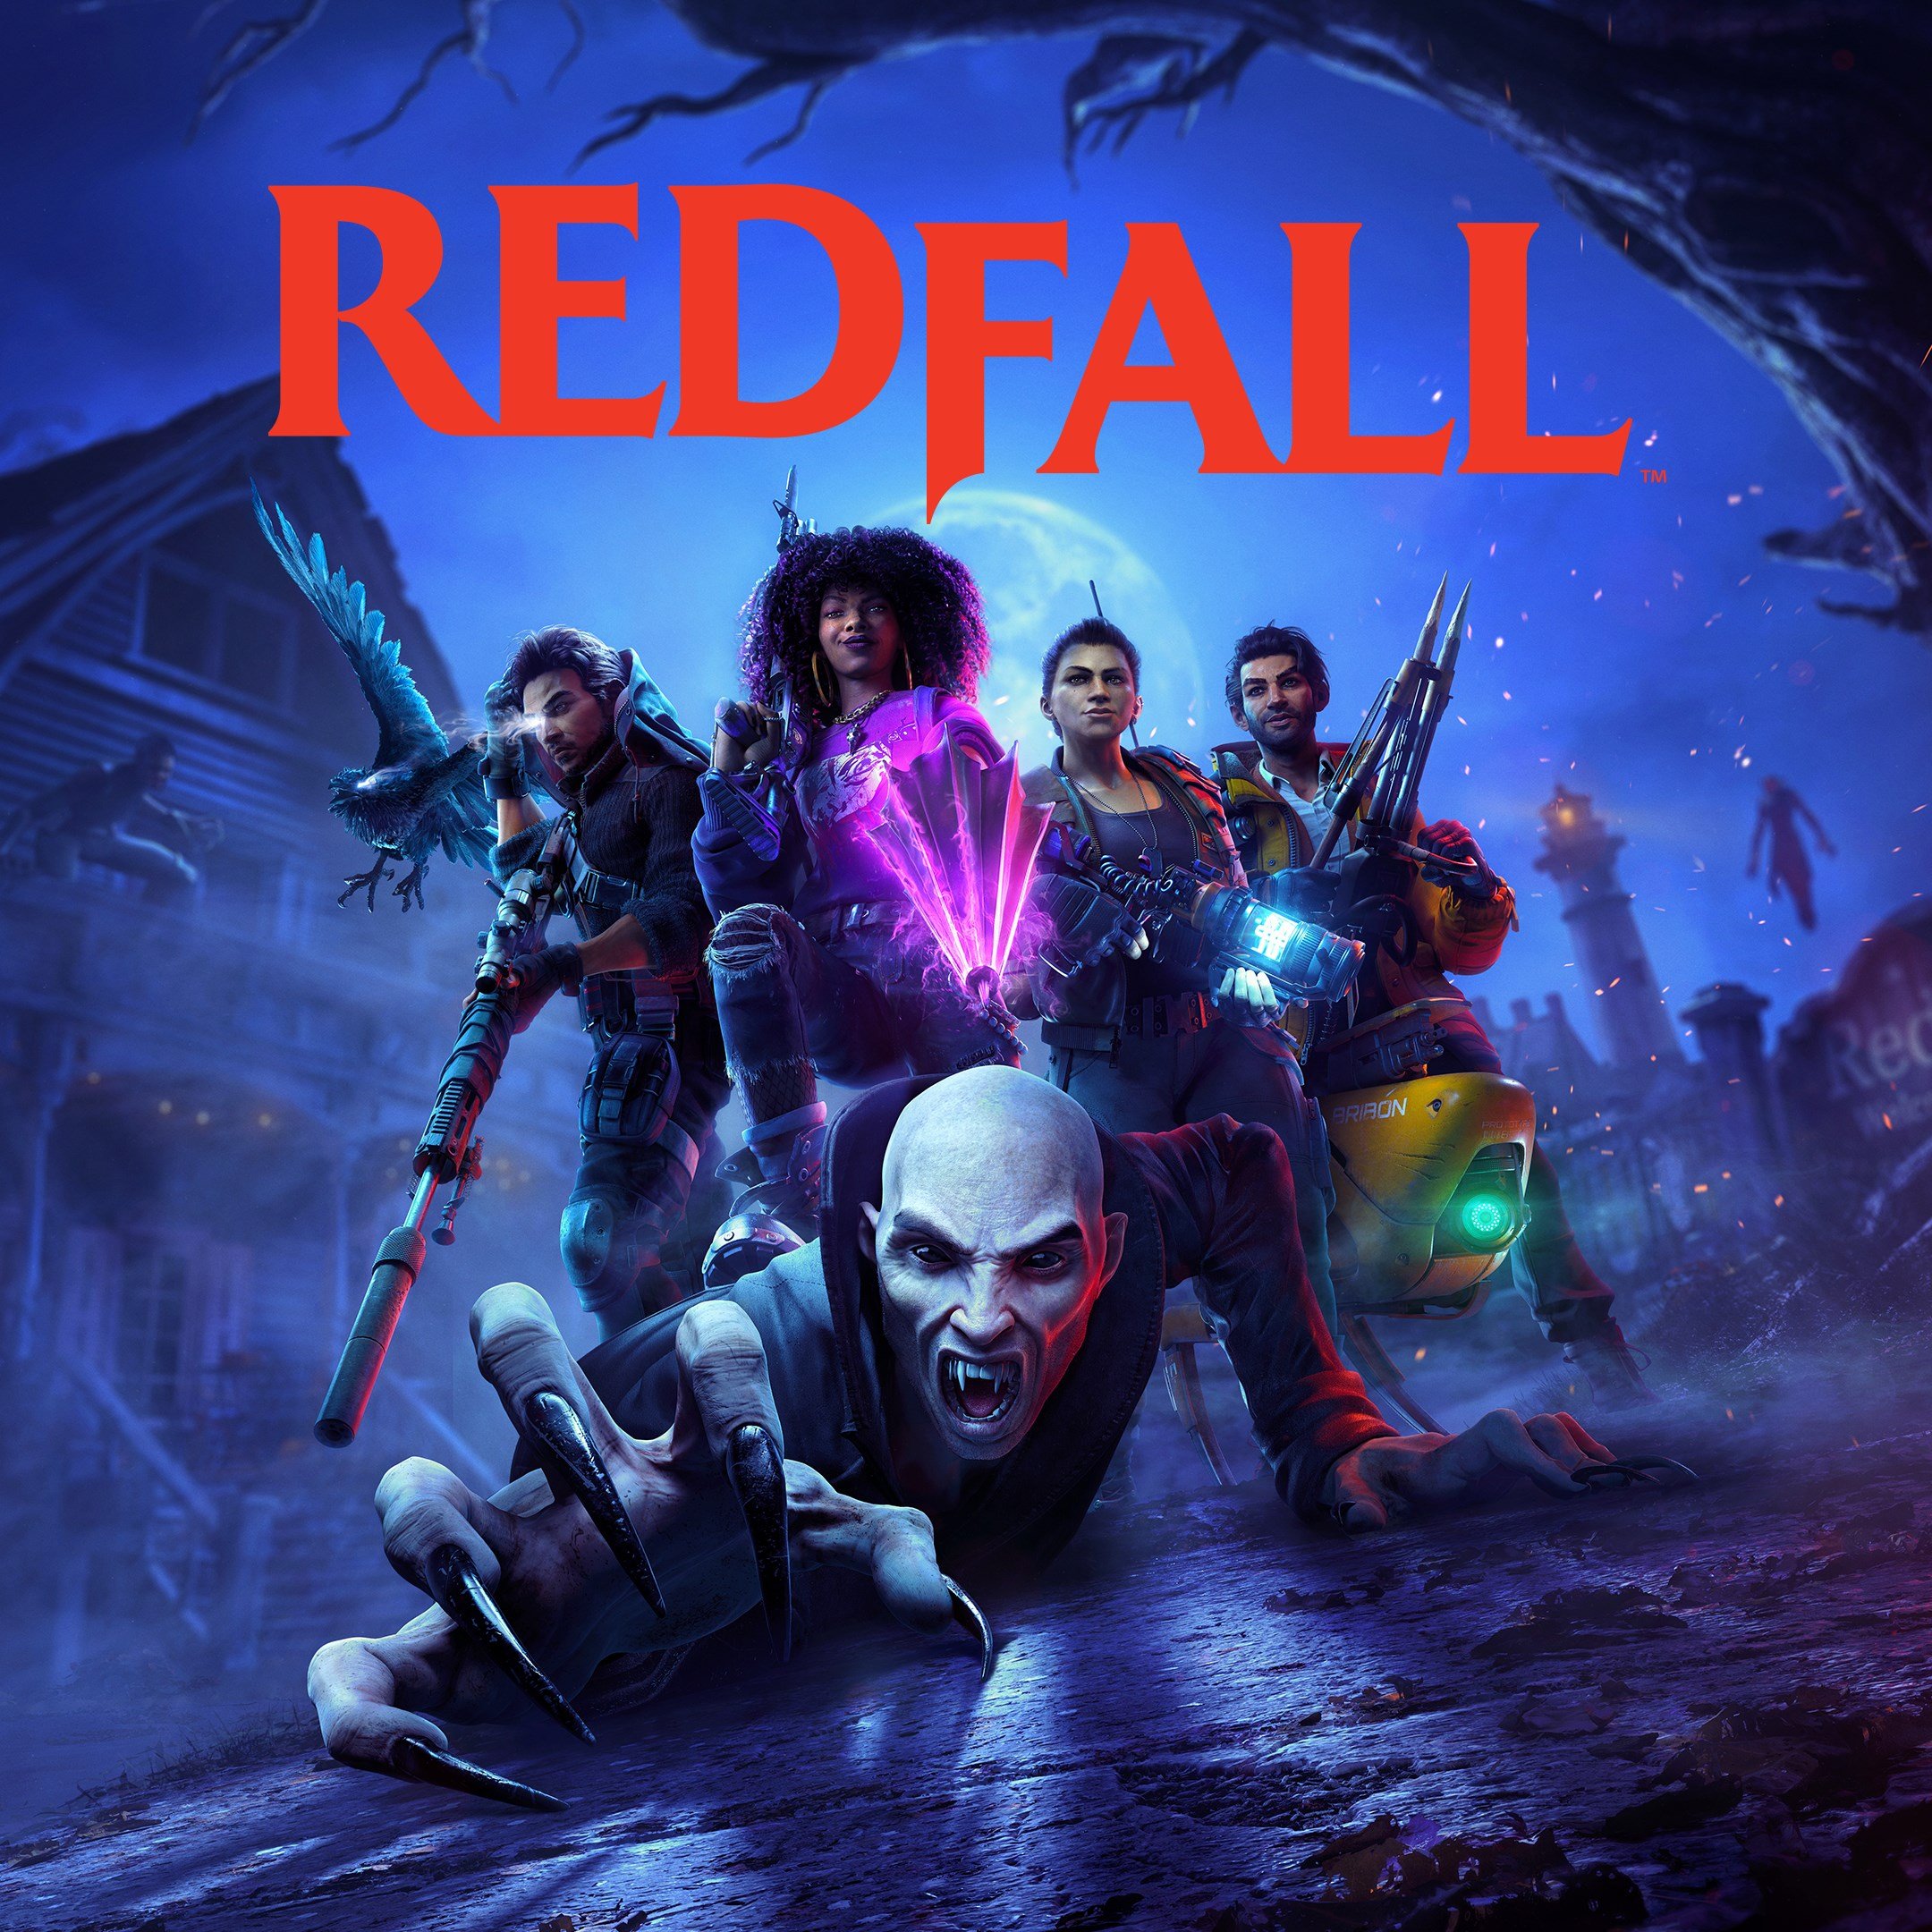 Boxart for Redfall